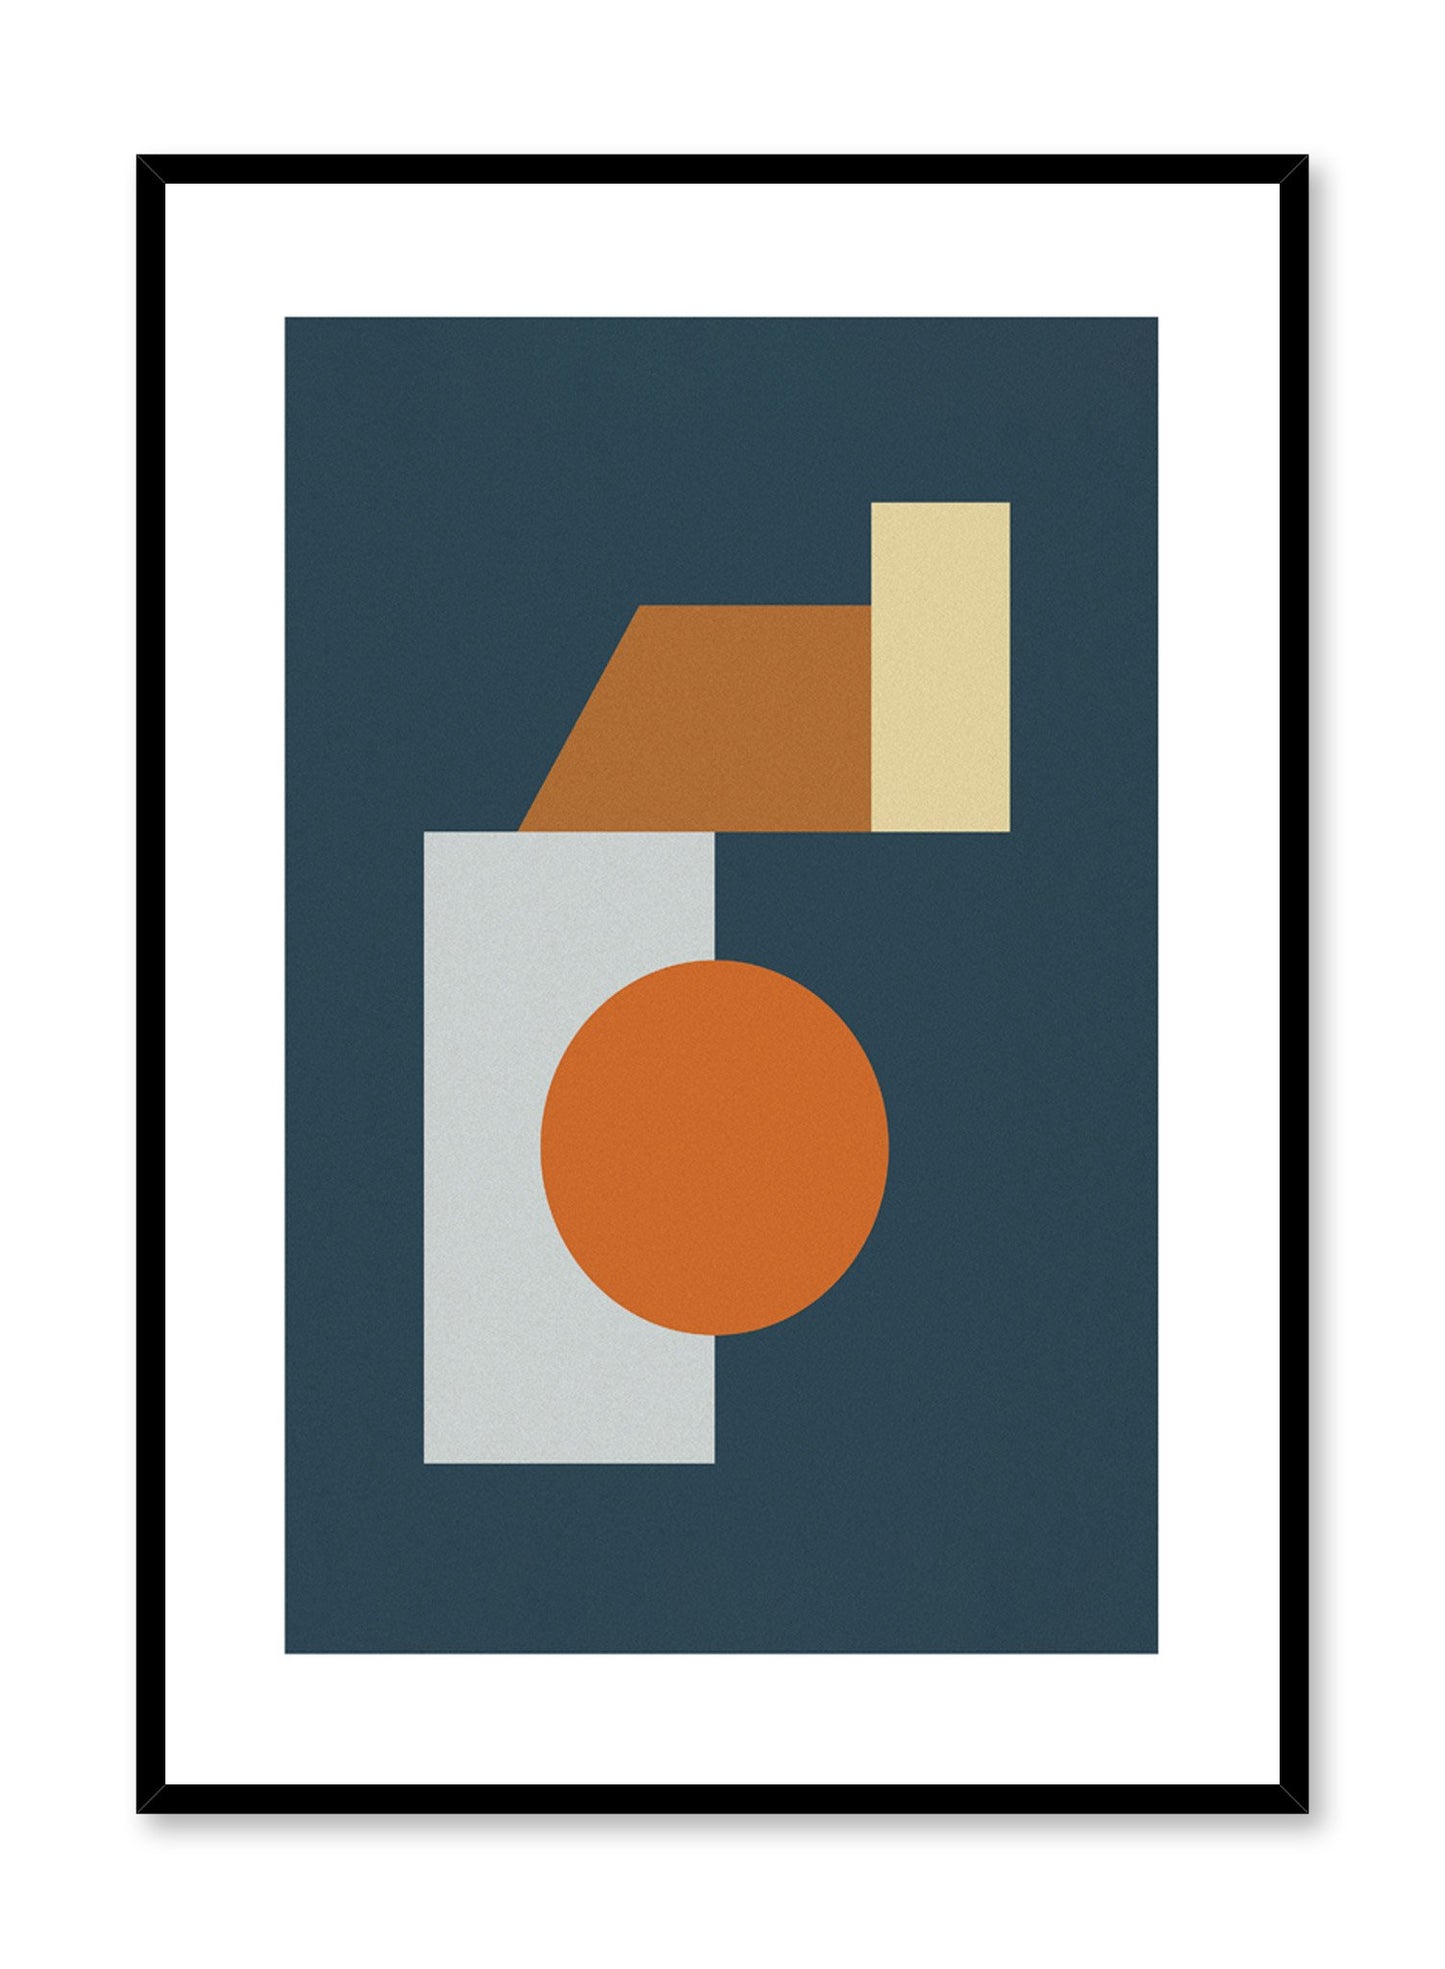 Minimalist design poster by Opposite Wall with Down Below abstract graphic design